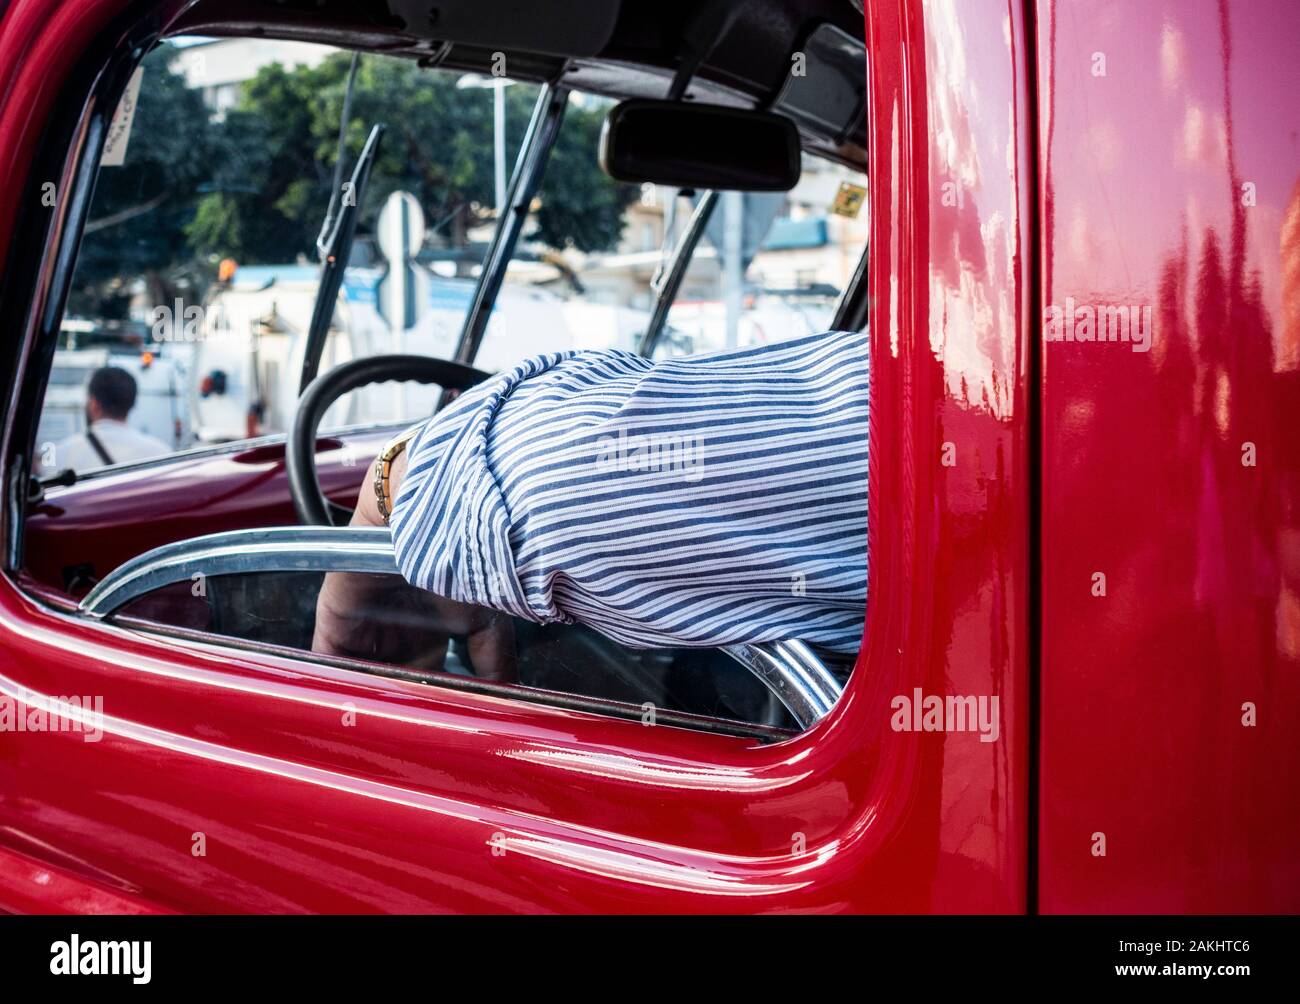 Cab of red Chevrolet pick up truck Stock Photo